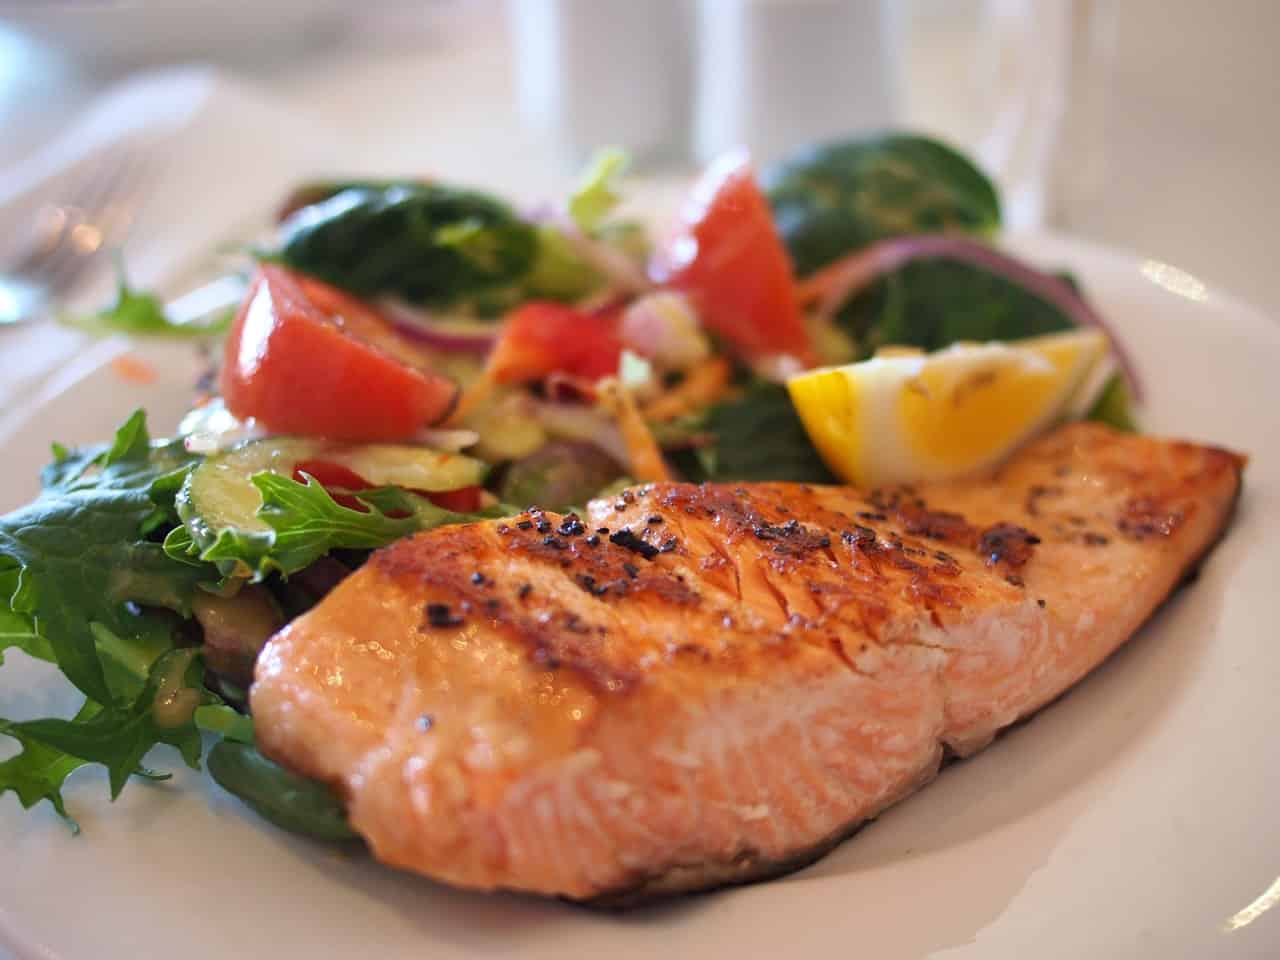 A plate of salmon and vegetables